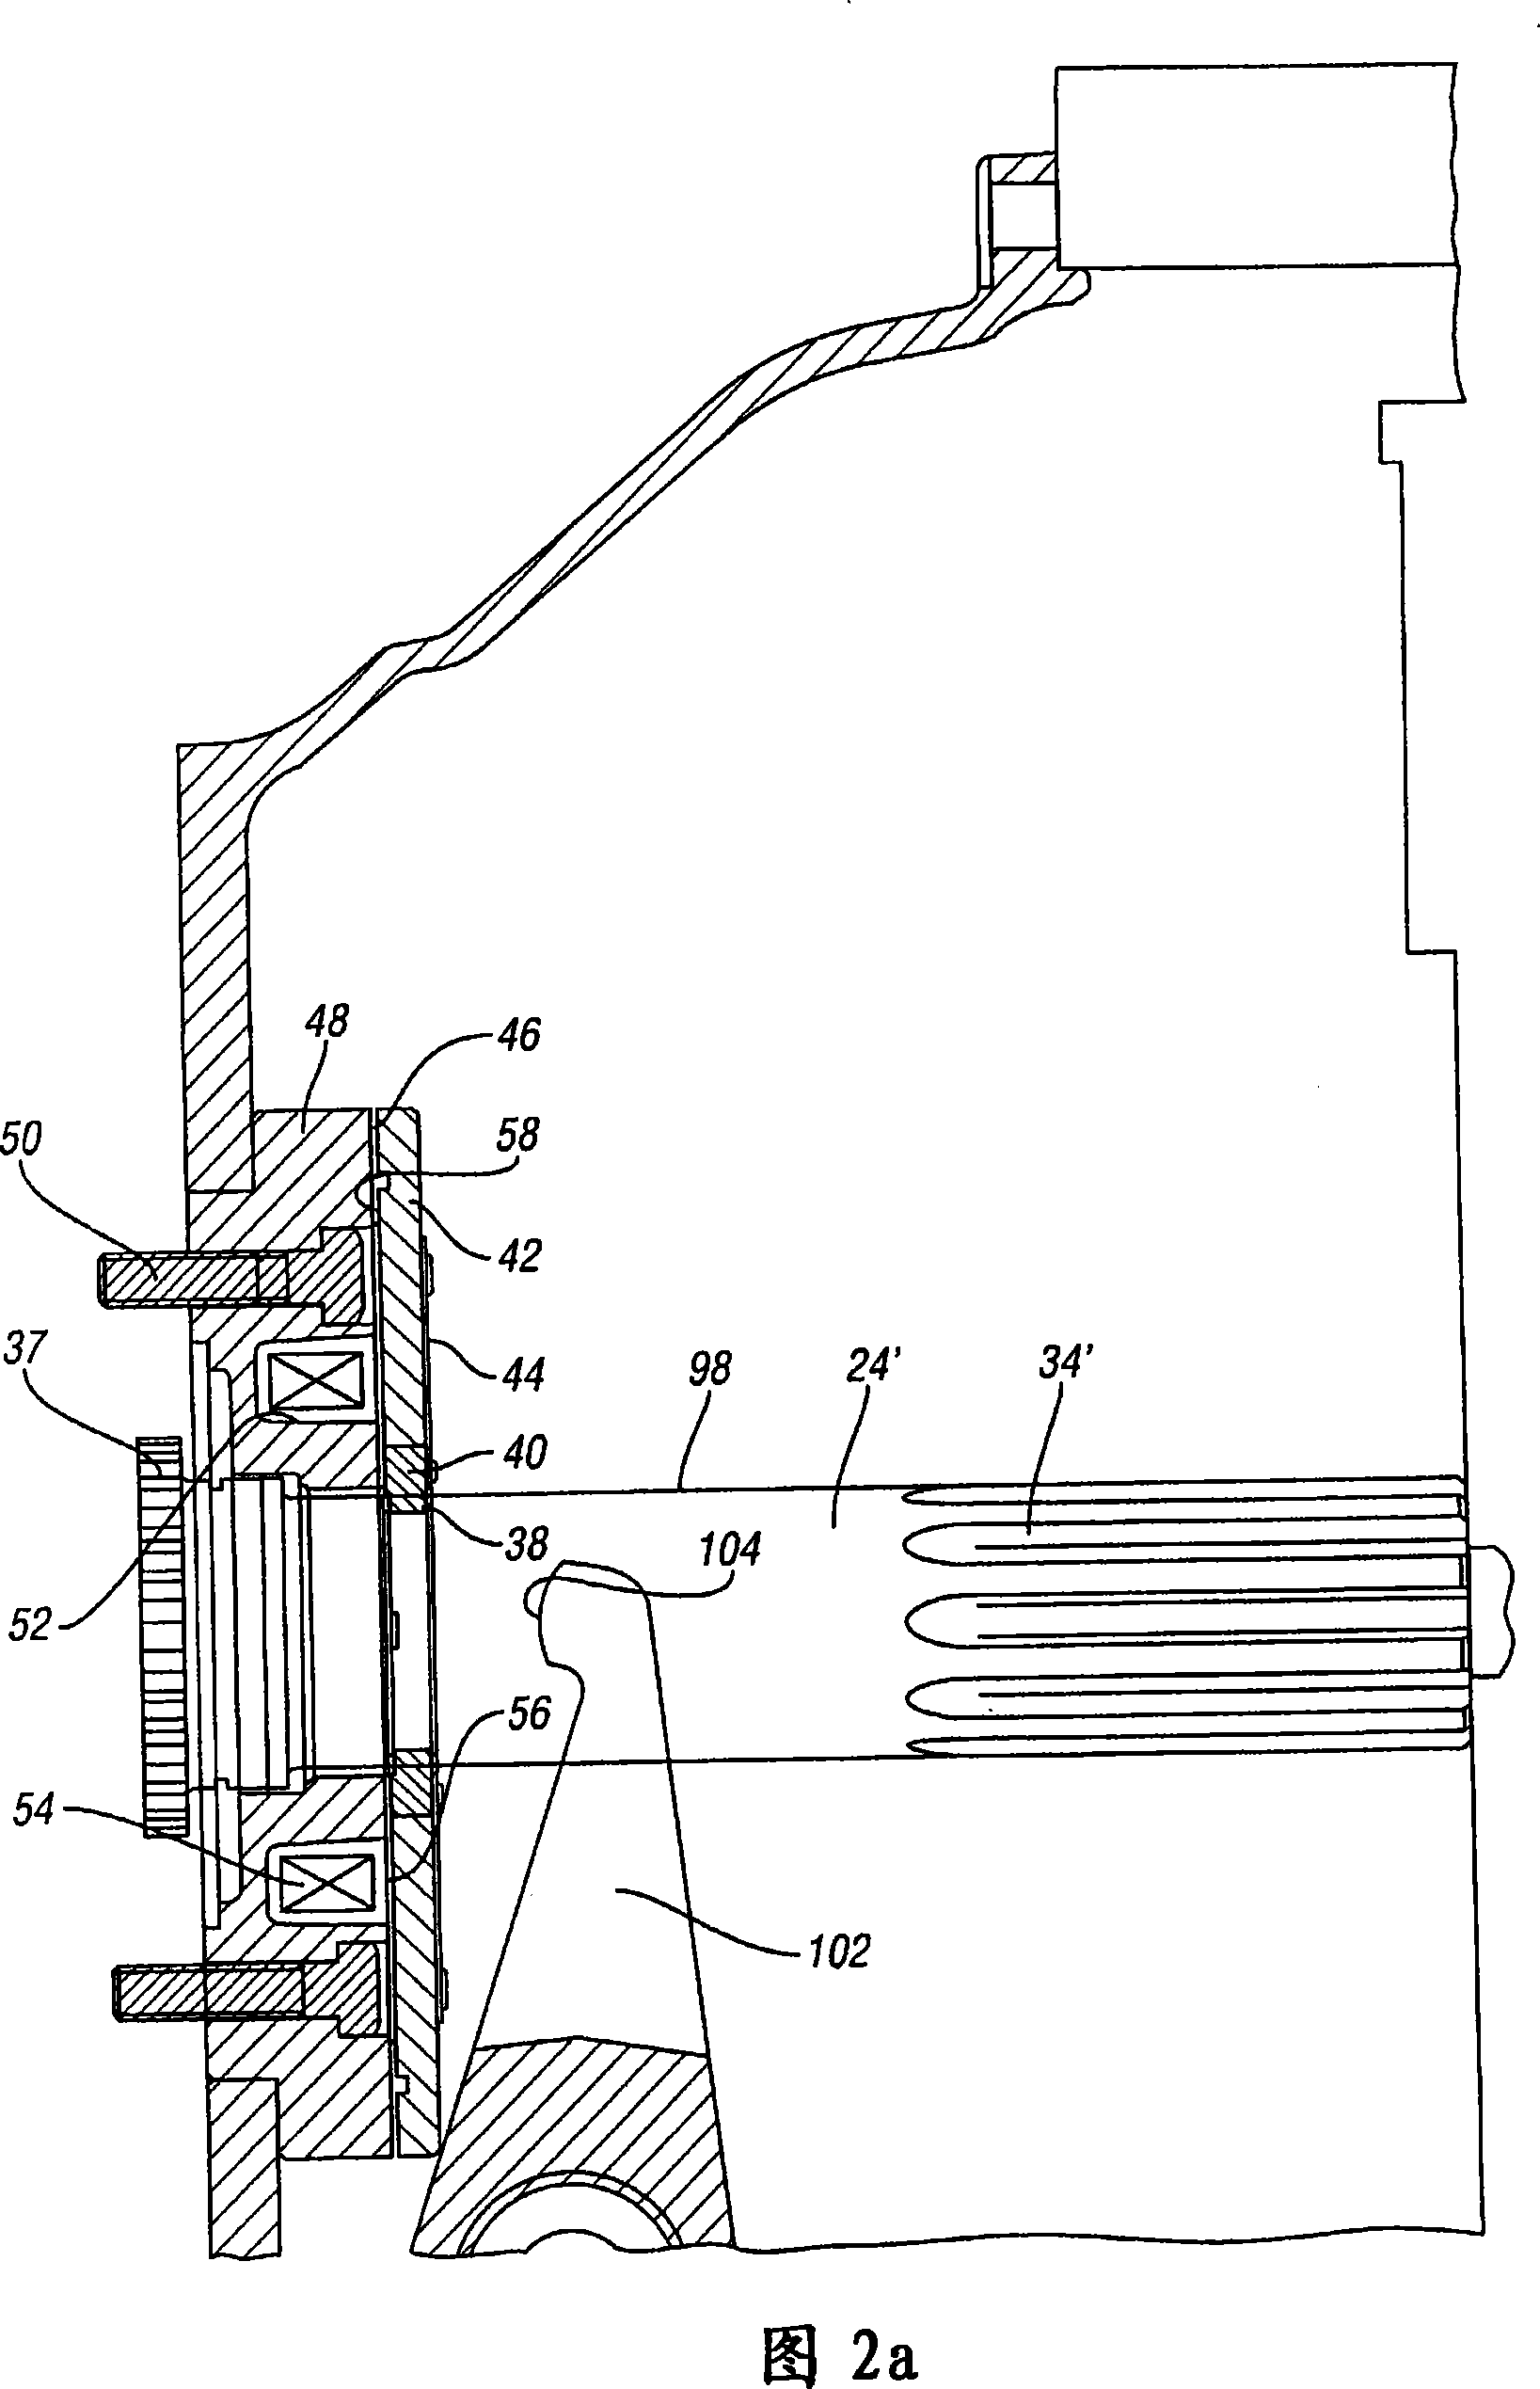 Control for an electromagnetic brake for a multiple-ratio power transmission in a vehicle powertrain